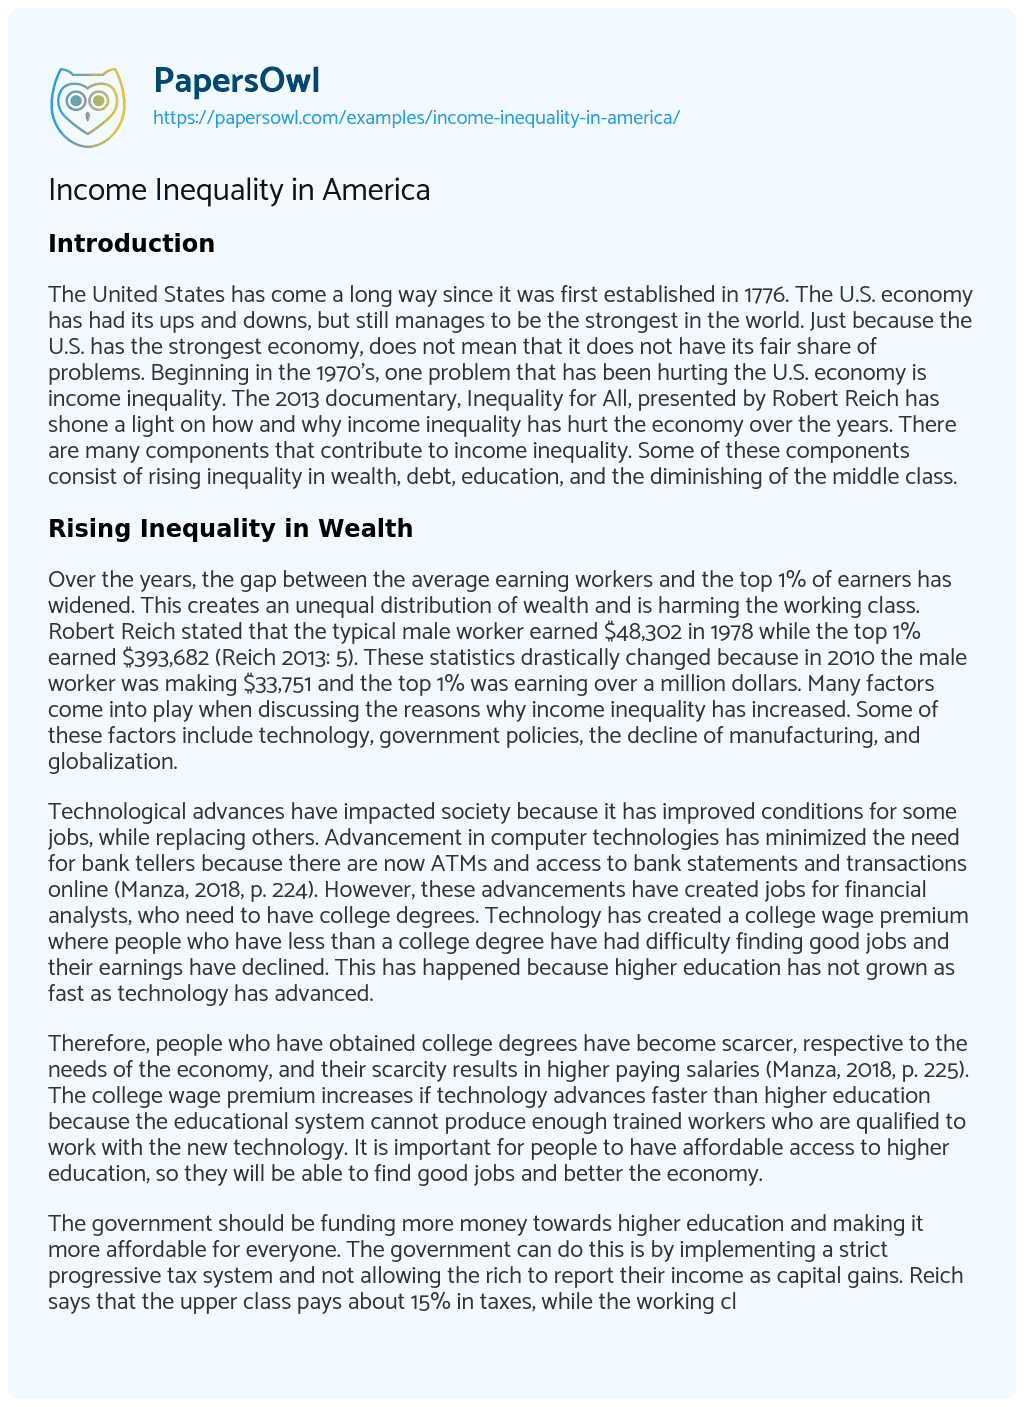 essay on income inequality in america